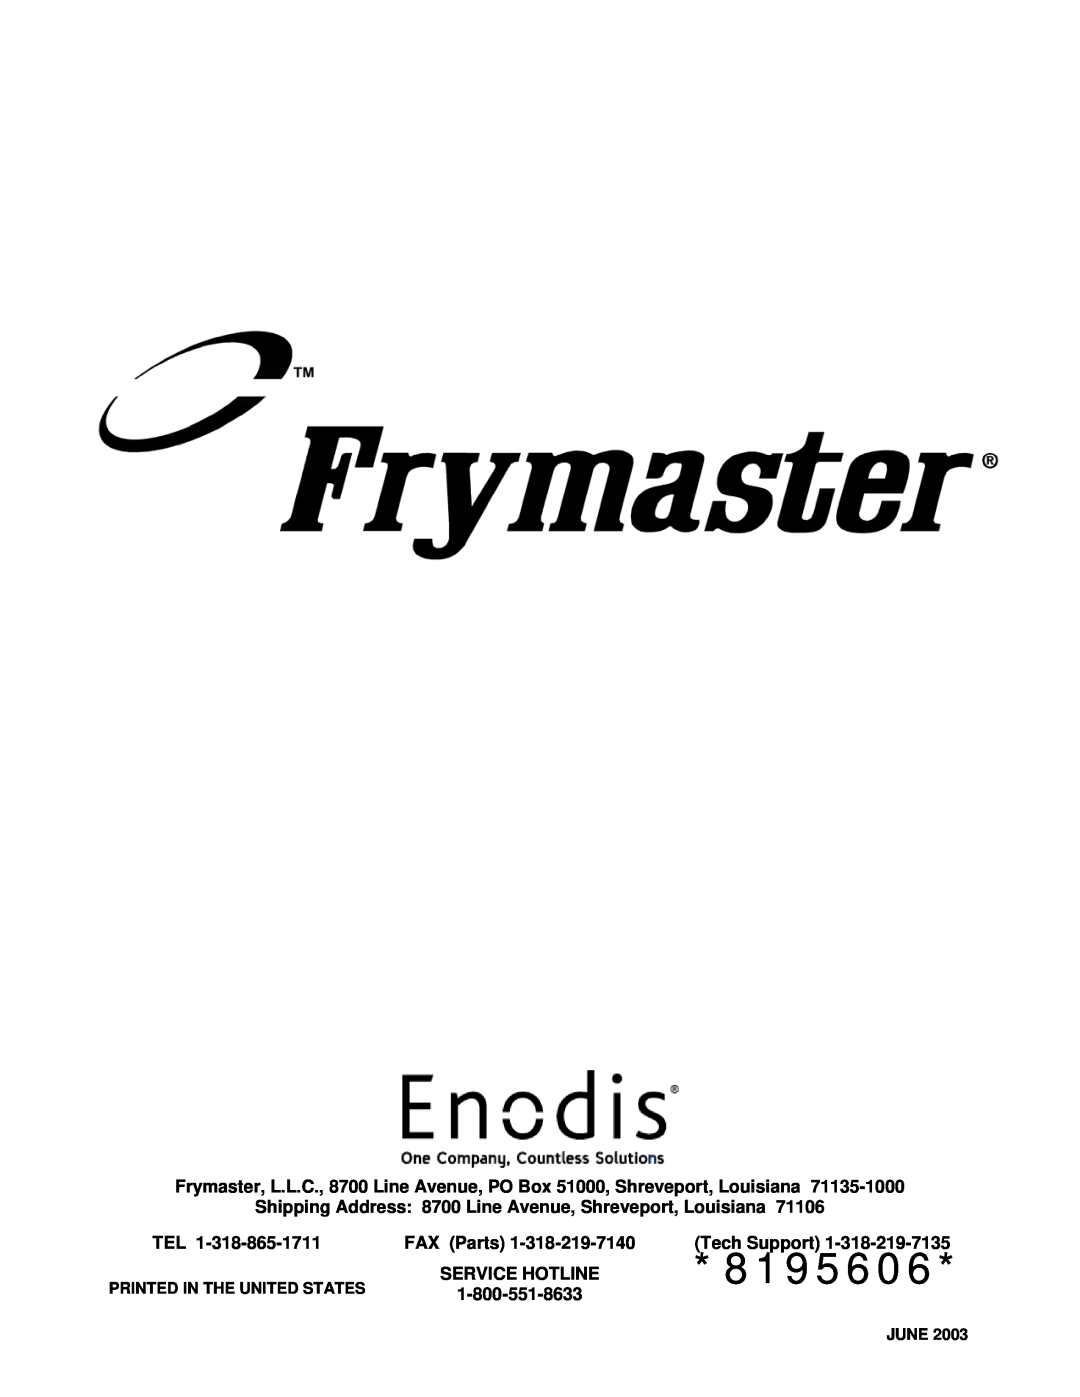 Frymaster H20.5 SERIES 8195606, Shipping Address 8700 Line Avenue, Shreveport, Louisiana, FAX Parts, Tech Support, June 